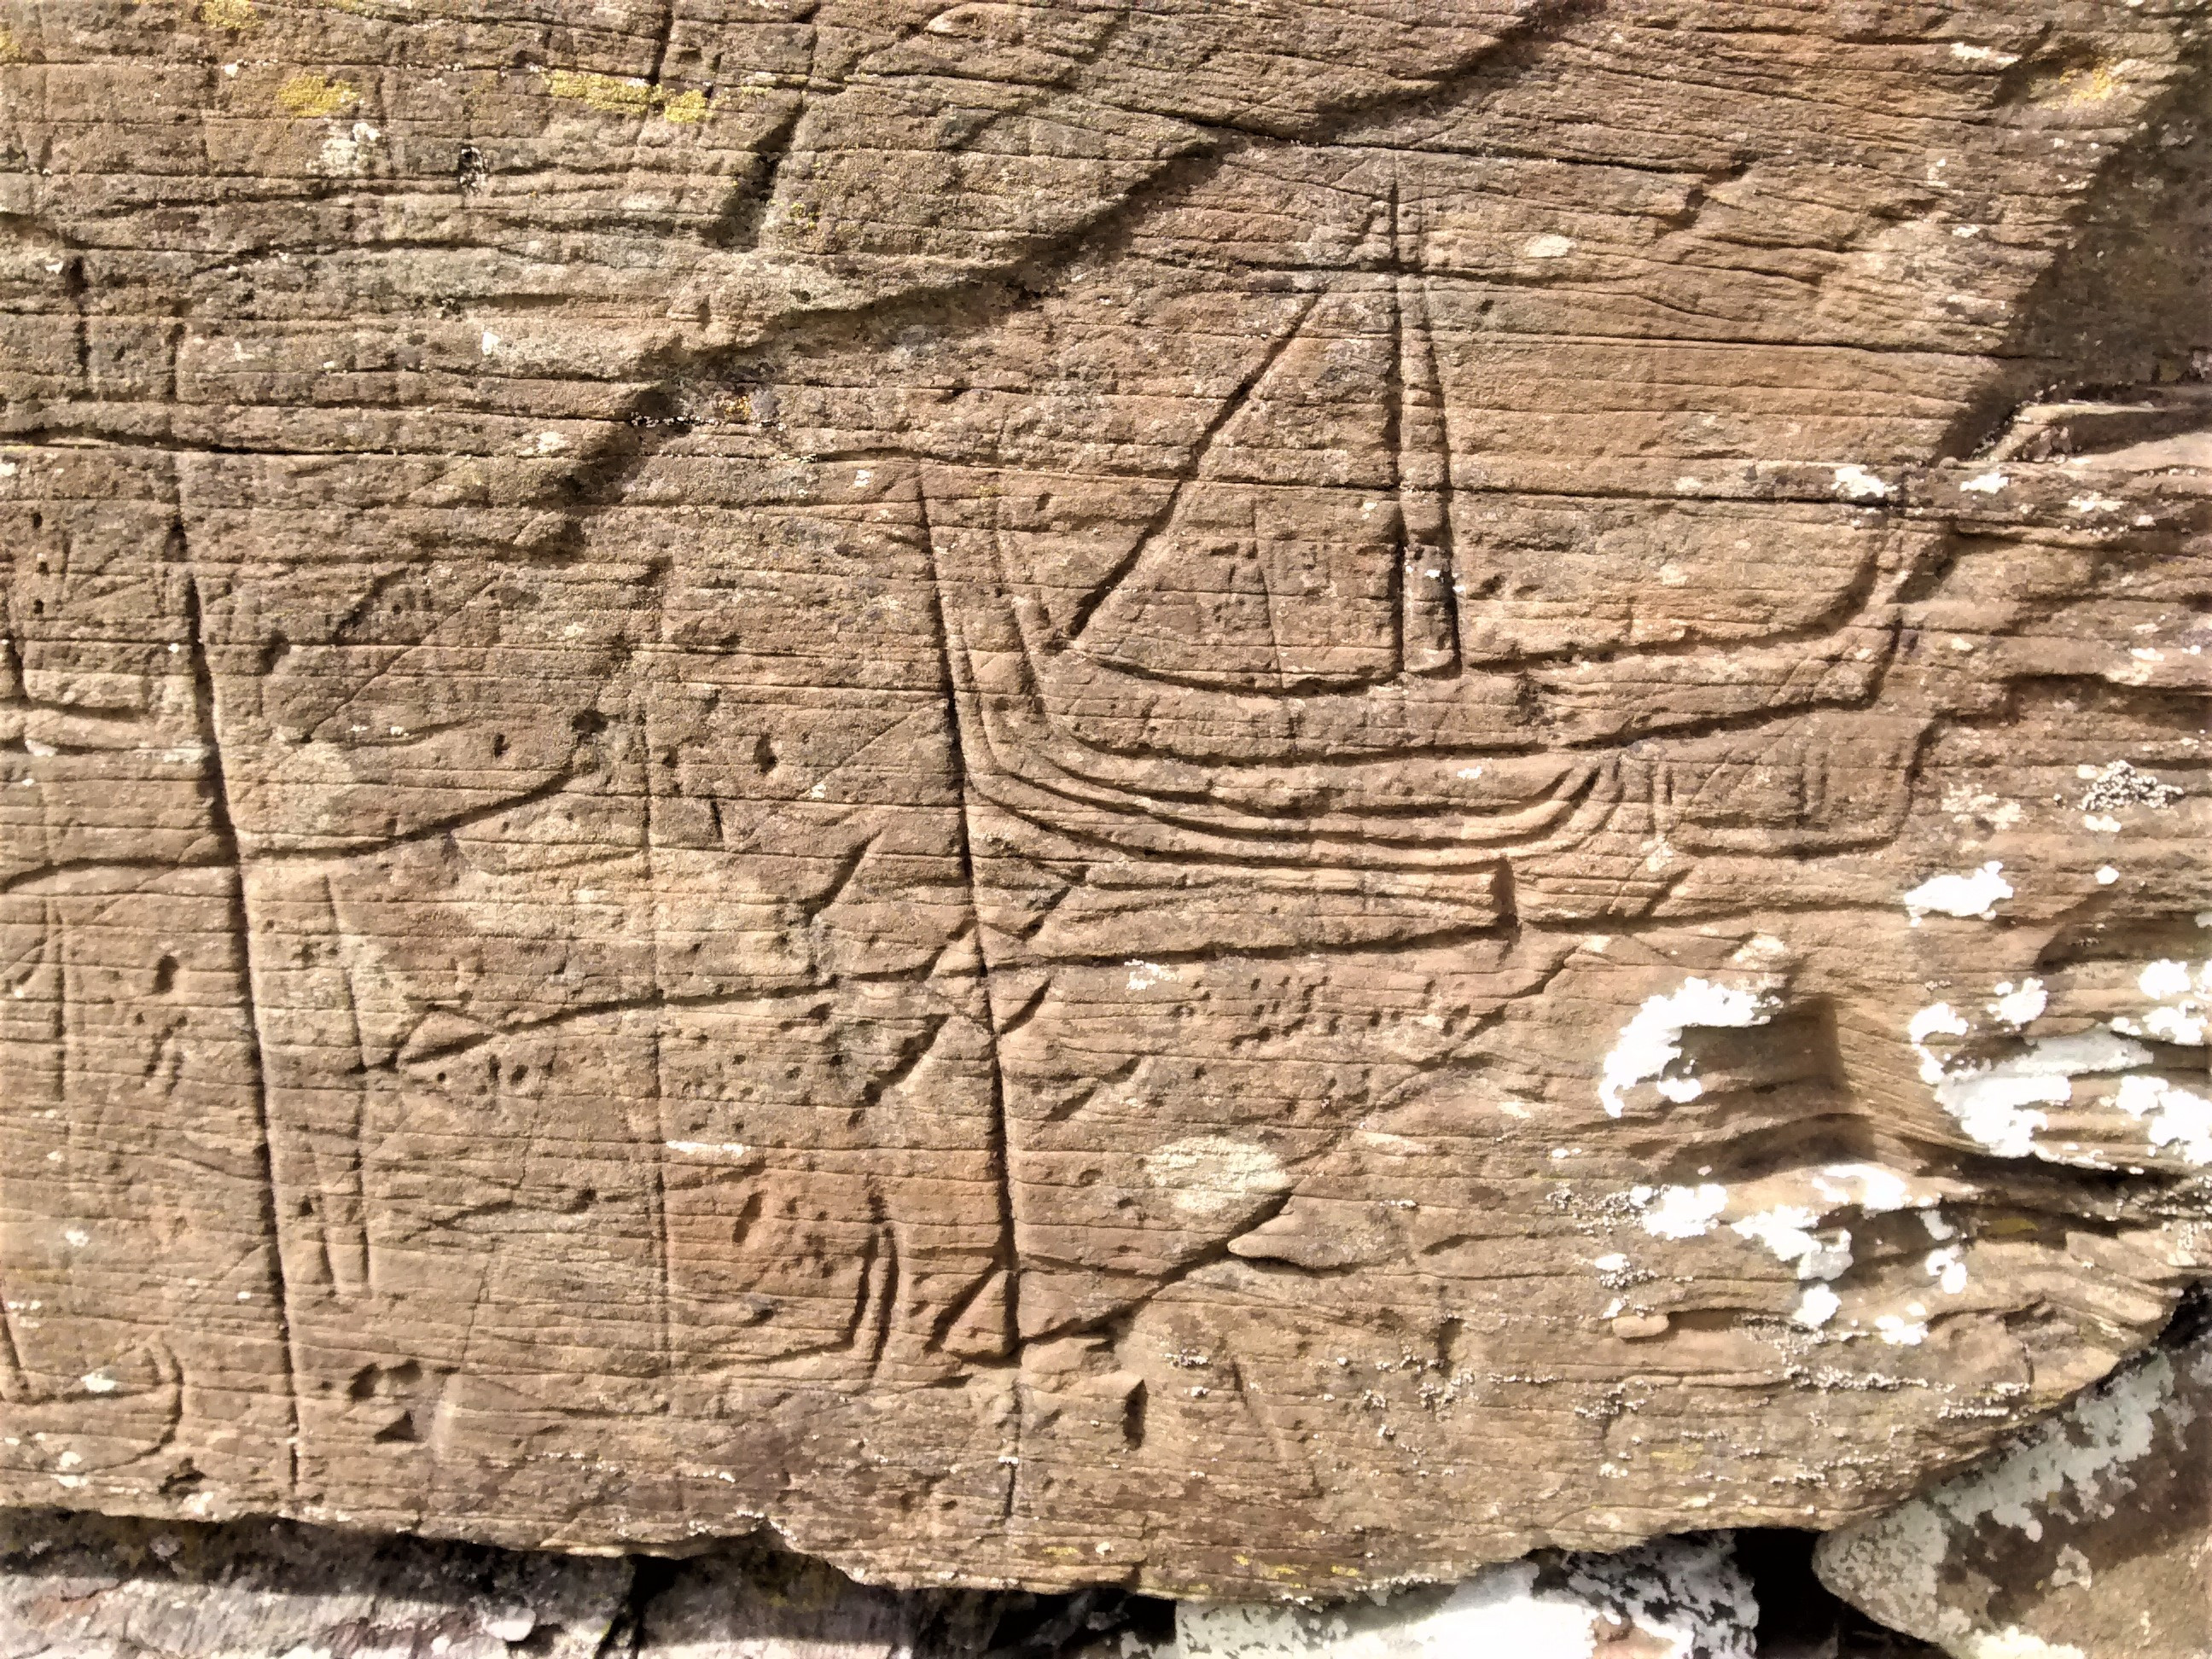 Medieval graffiti on the outer wall of Kilchattan Old Parish Church. The boat has a prominent left facing sail and an end post in the shape of an animal head. Cross like motifs are also incised into the wall face.